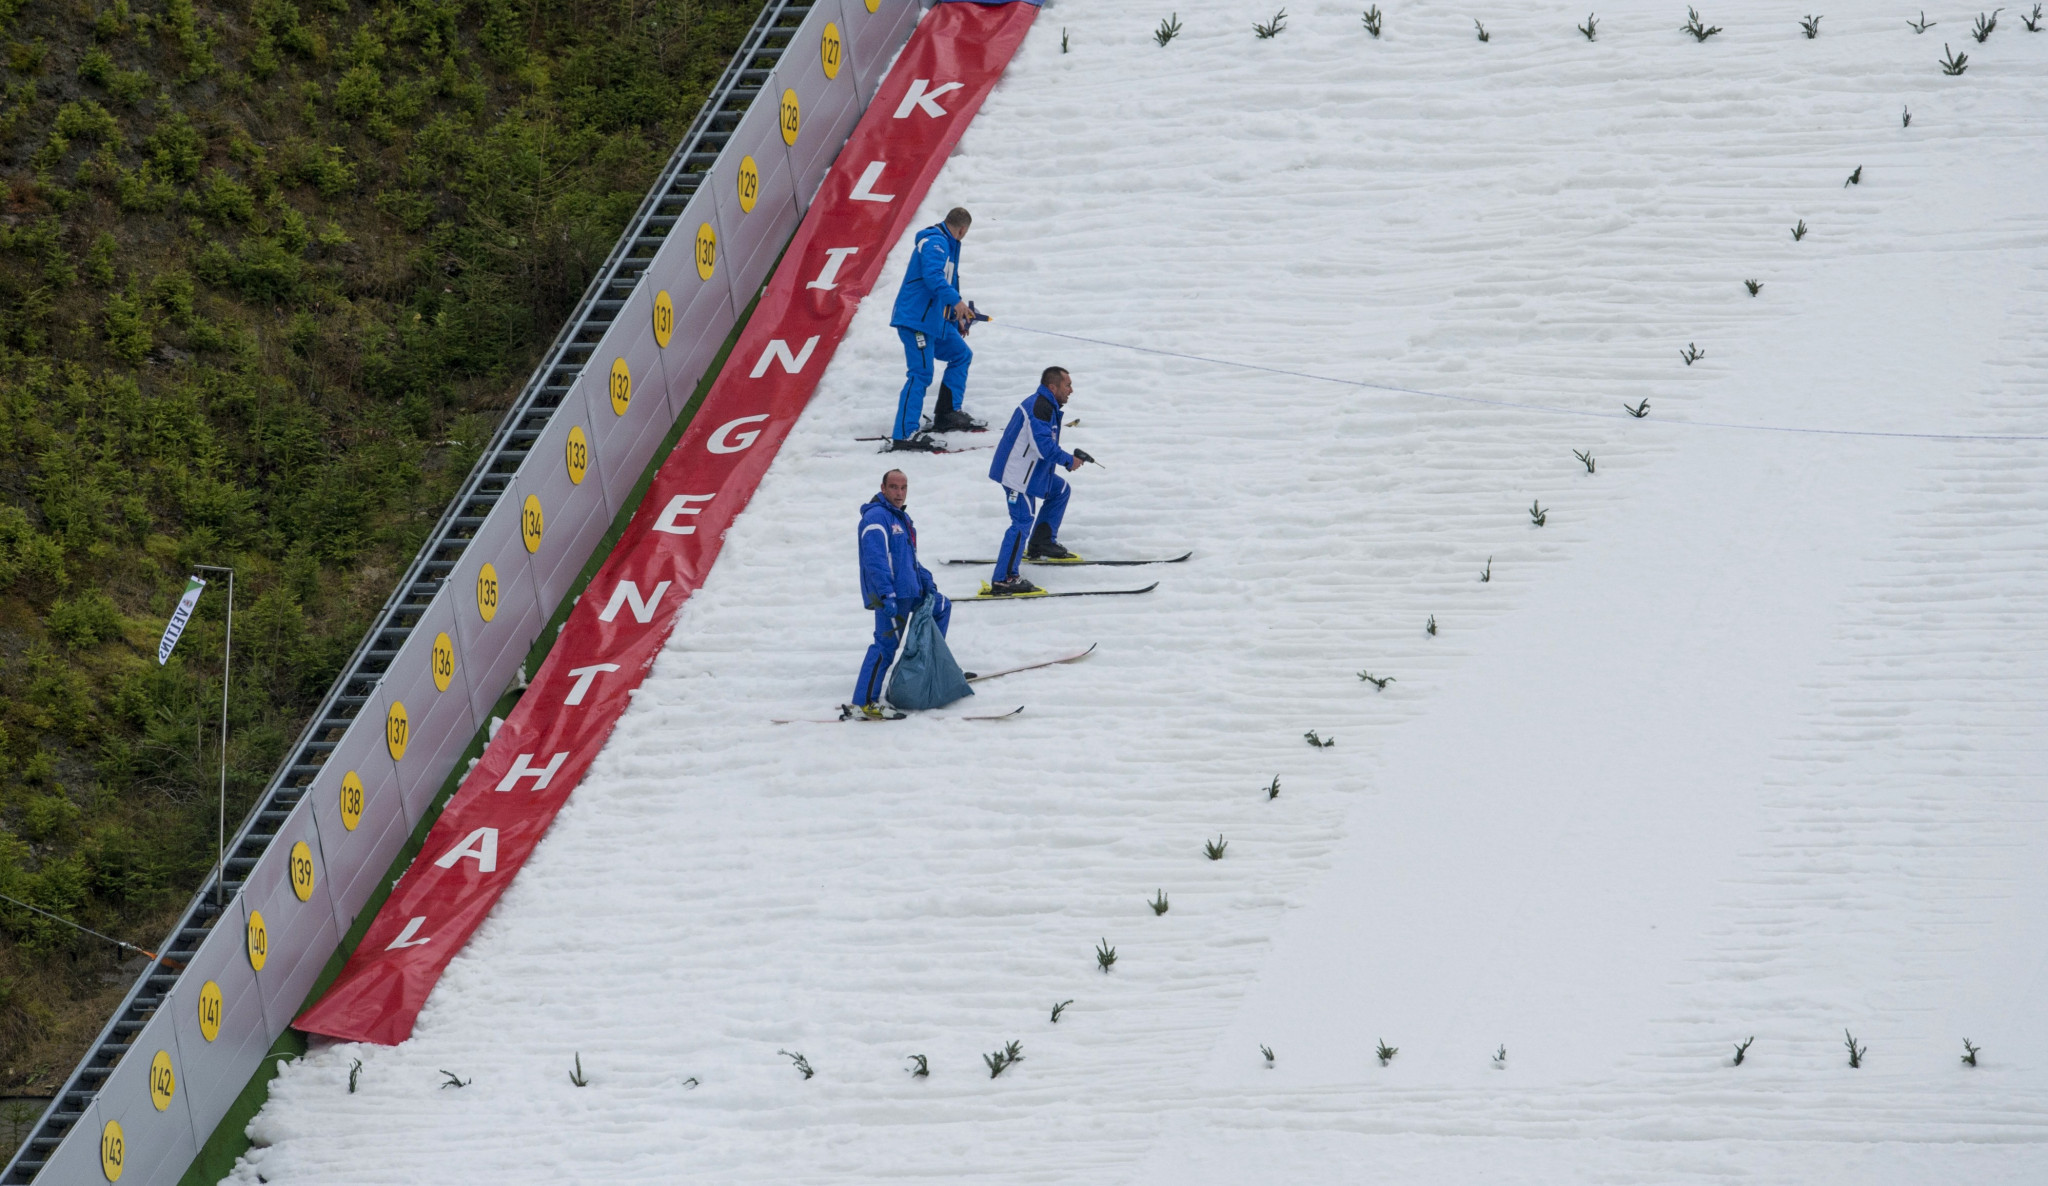 Klingenthal's training and PCR events have been cancelled due to poor weather ©Getty Images